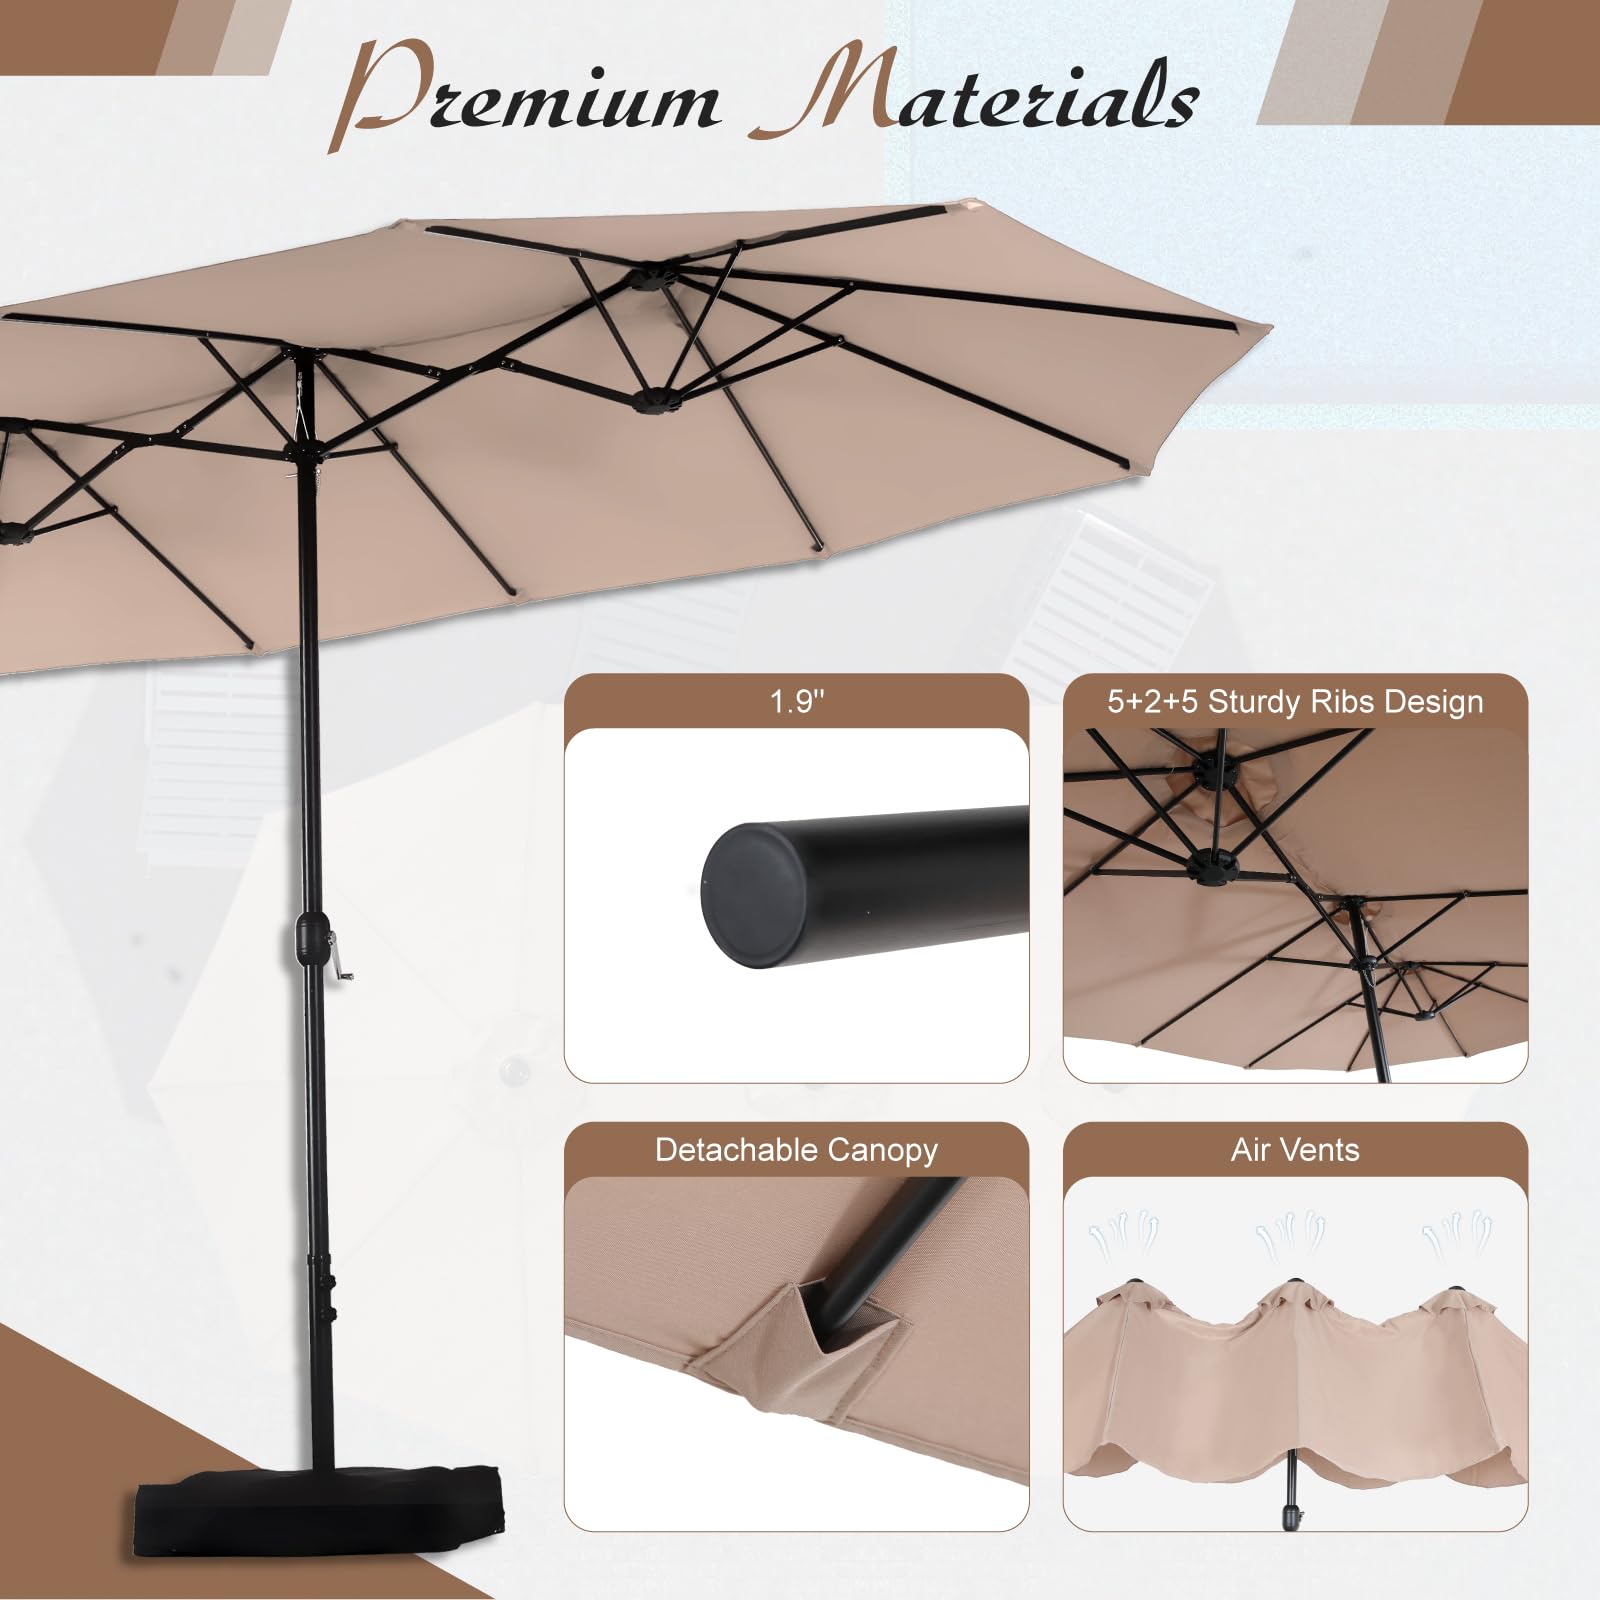 MFSTUDIO 15ft Double Sided Patio Umbrella with Base Included, Outdoor Large Rectangular Market Umbrellas with Crank Handle for Deck Pool Shade, Beige